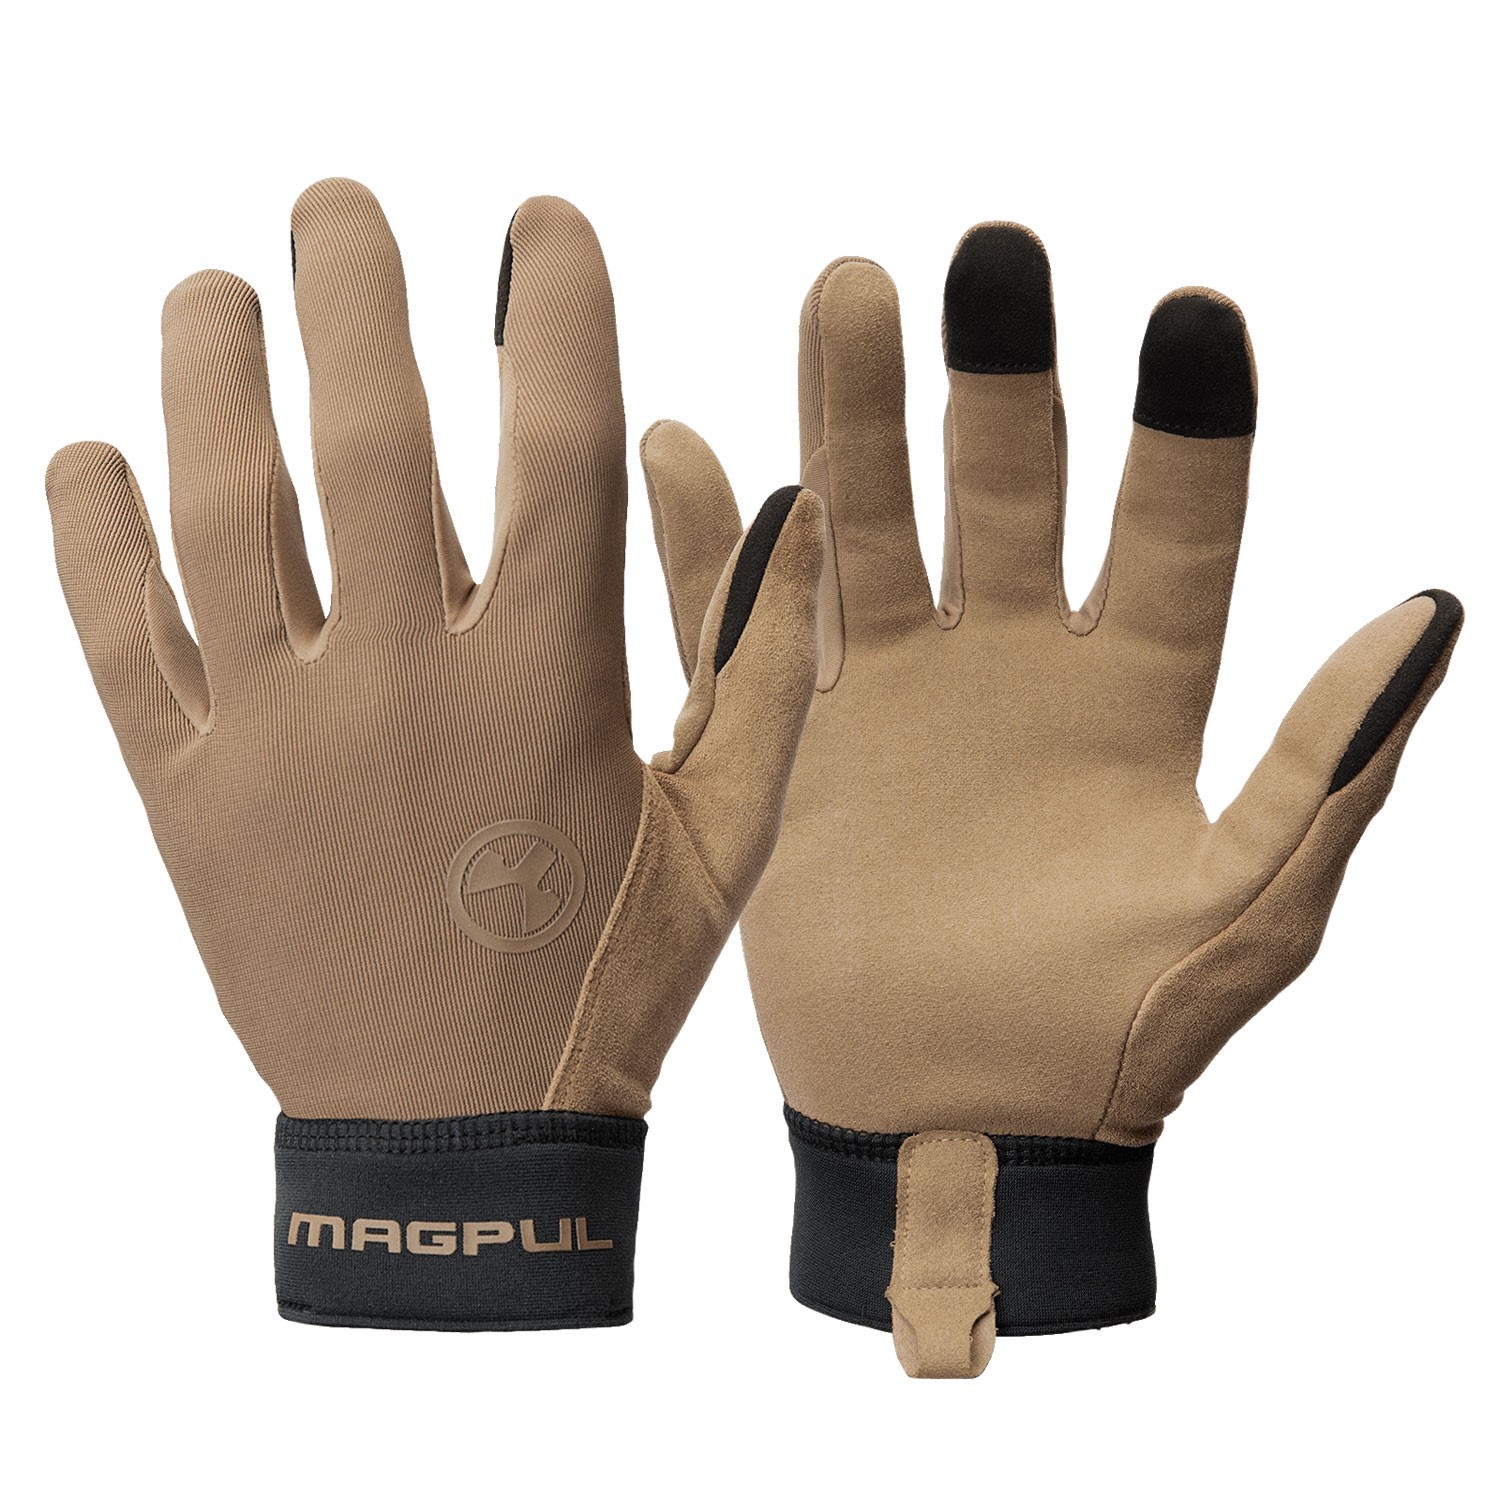 MAGPUL TECHNICAL GLOVES,2XL, COYOTE, HAS TOUCHSCREEN CAPABLE FINGER TIPS.